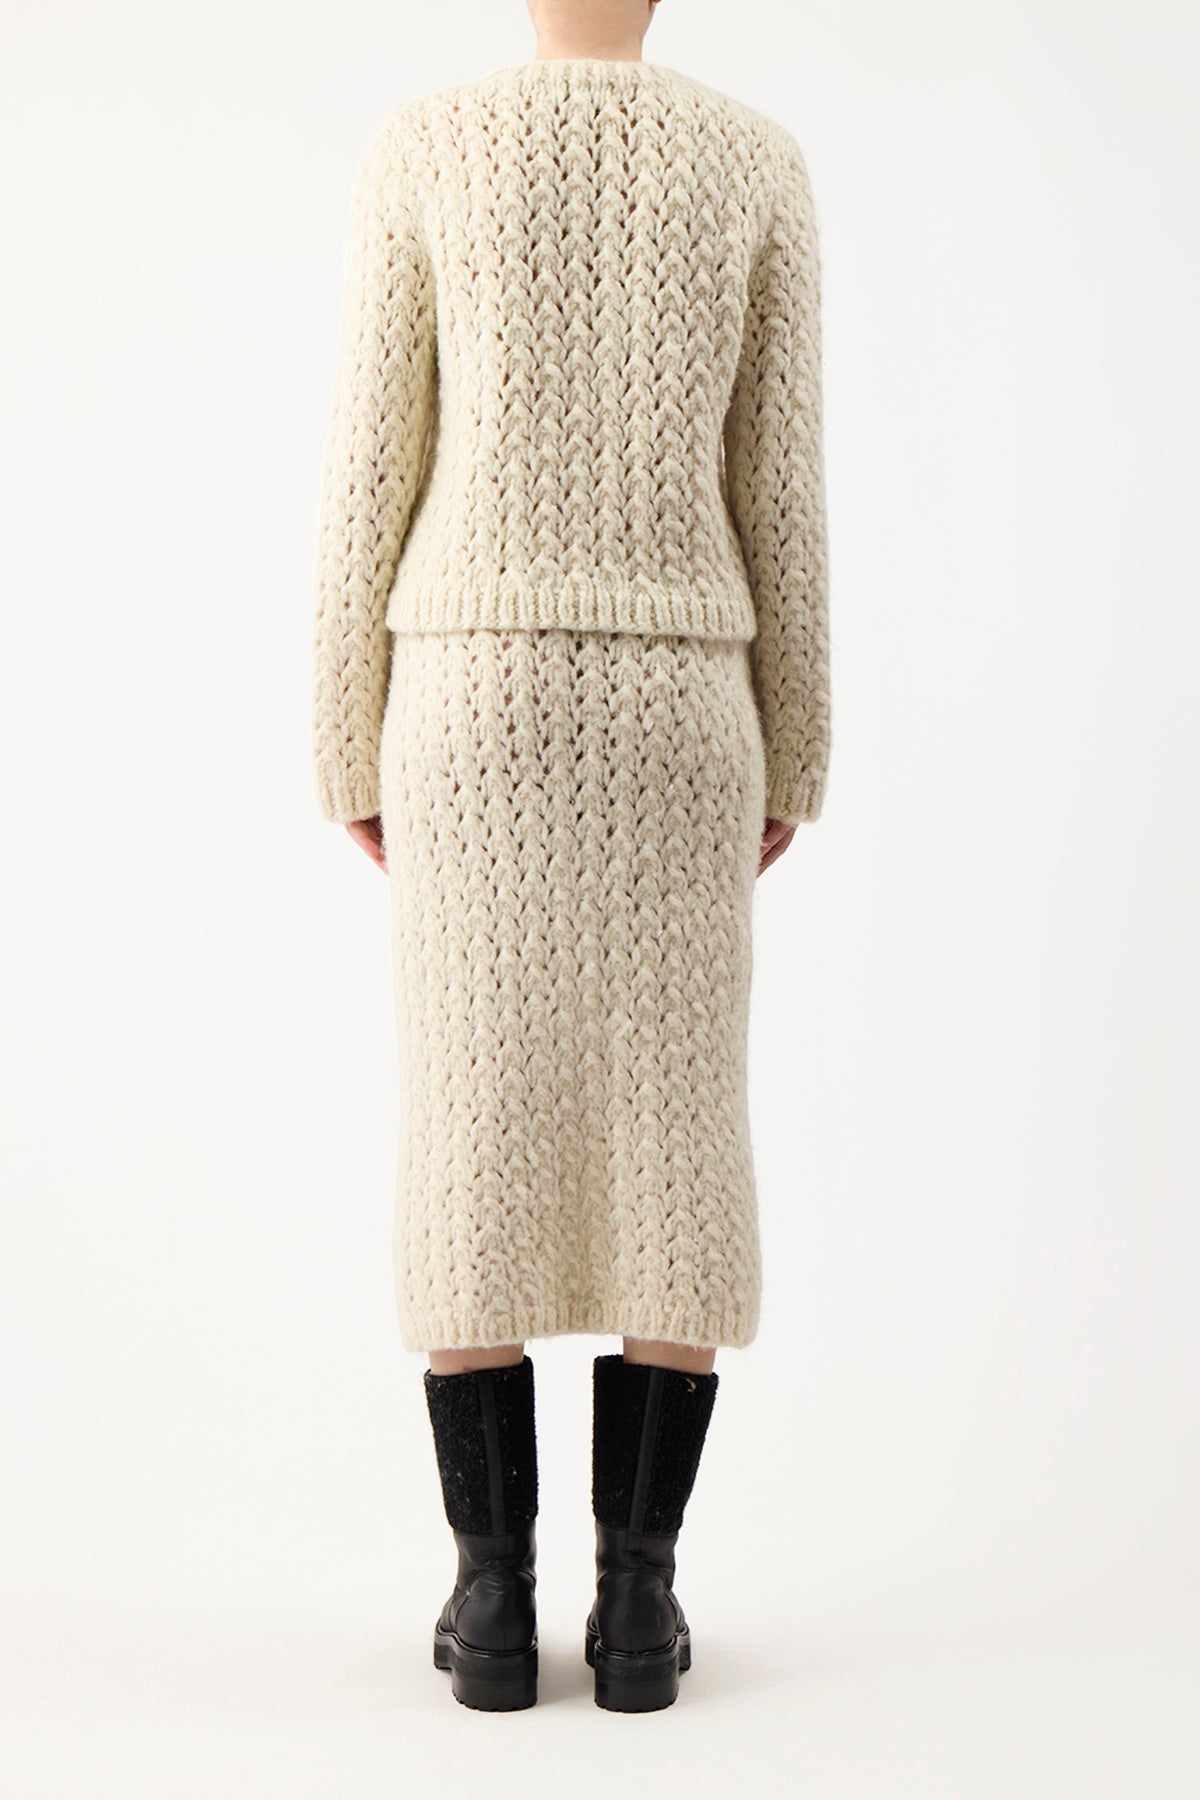 Collin Skirt in Ivory Welfat Cashmere